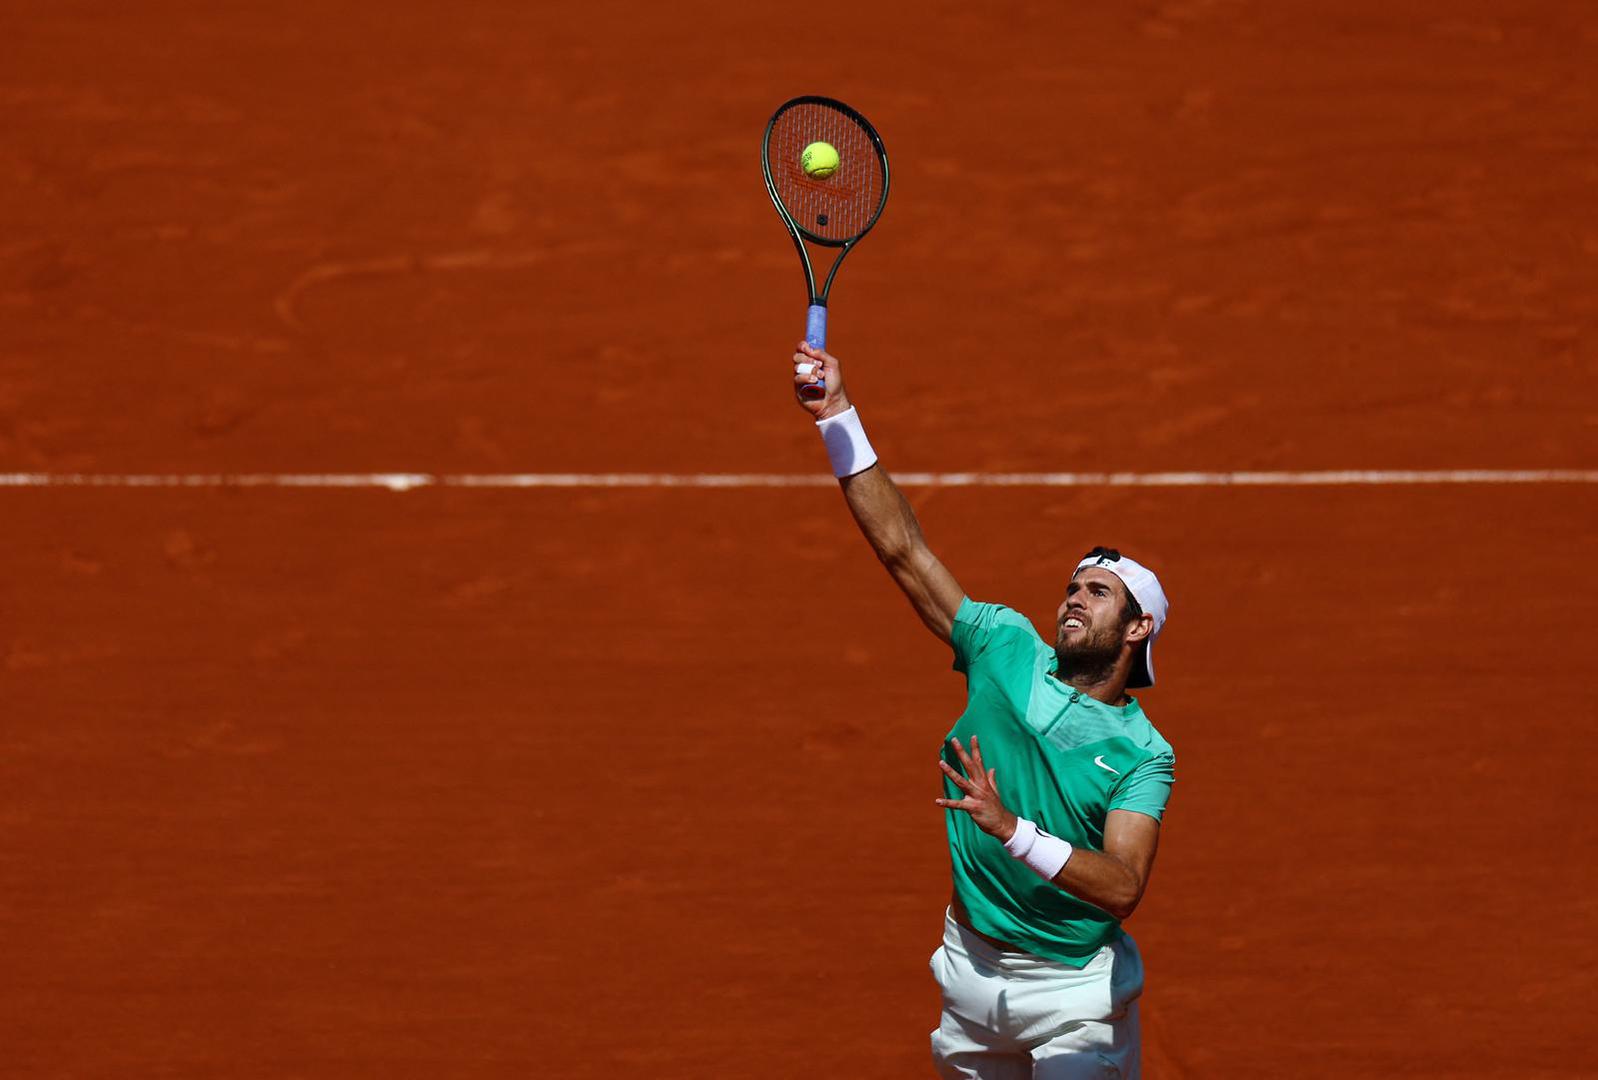 Tennis - French Open - Roland Garros, Paris, France - May 28, 2023 Russia's Karen Khachanov in action during his first round match against France's Constant Lestienne REUTERS/Lisi Niesner Photo: LISI NIESNER/REUTERS